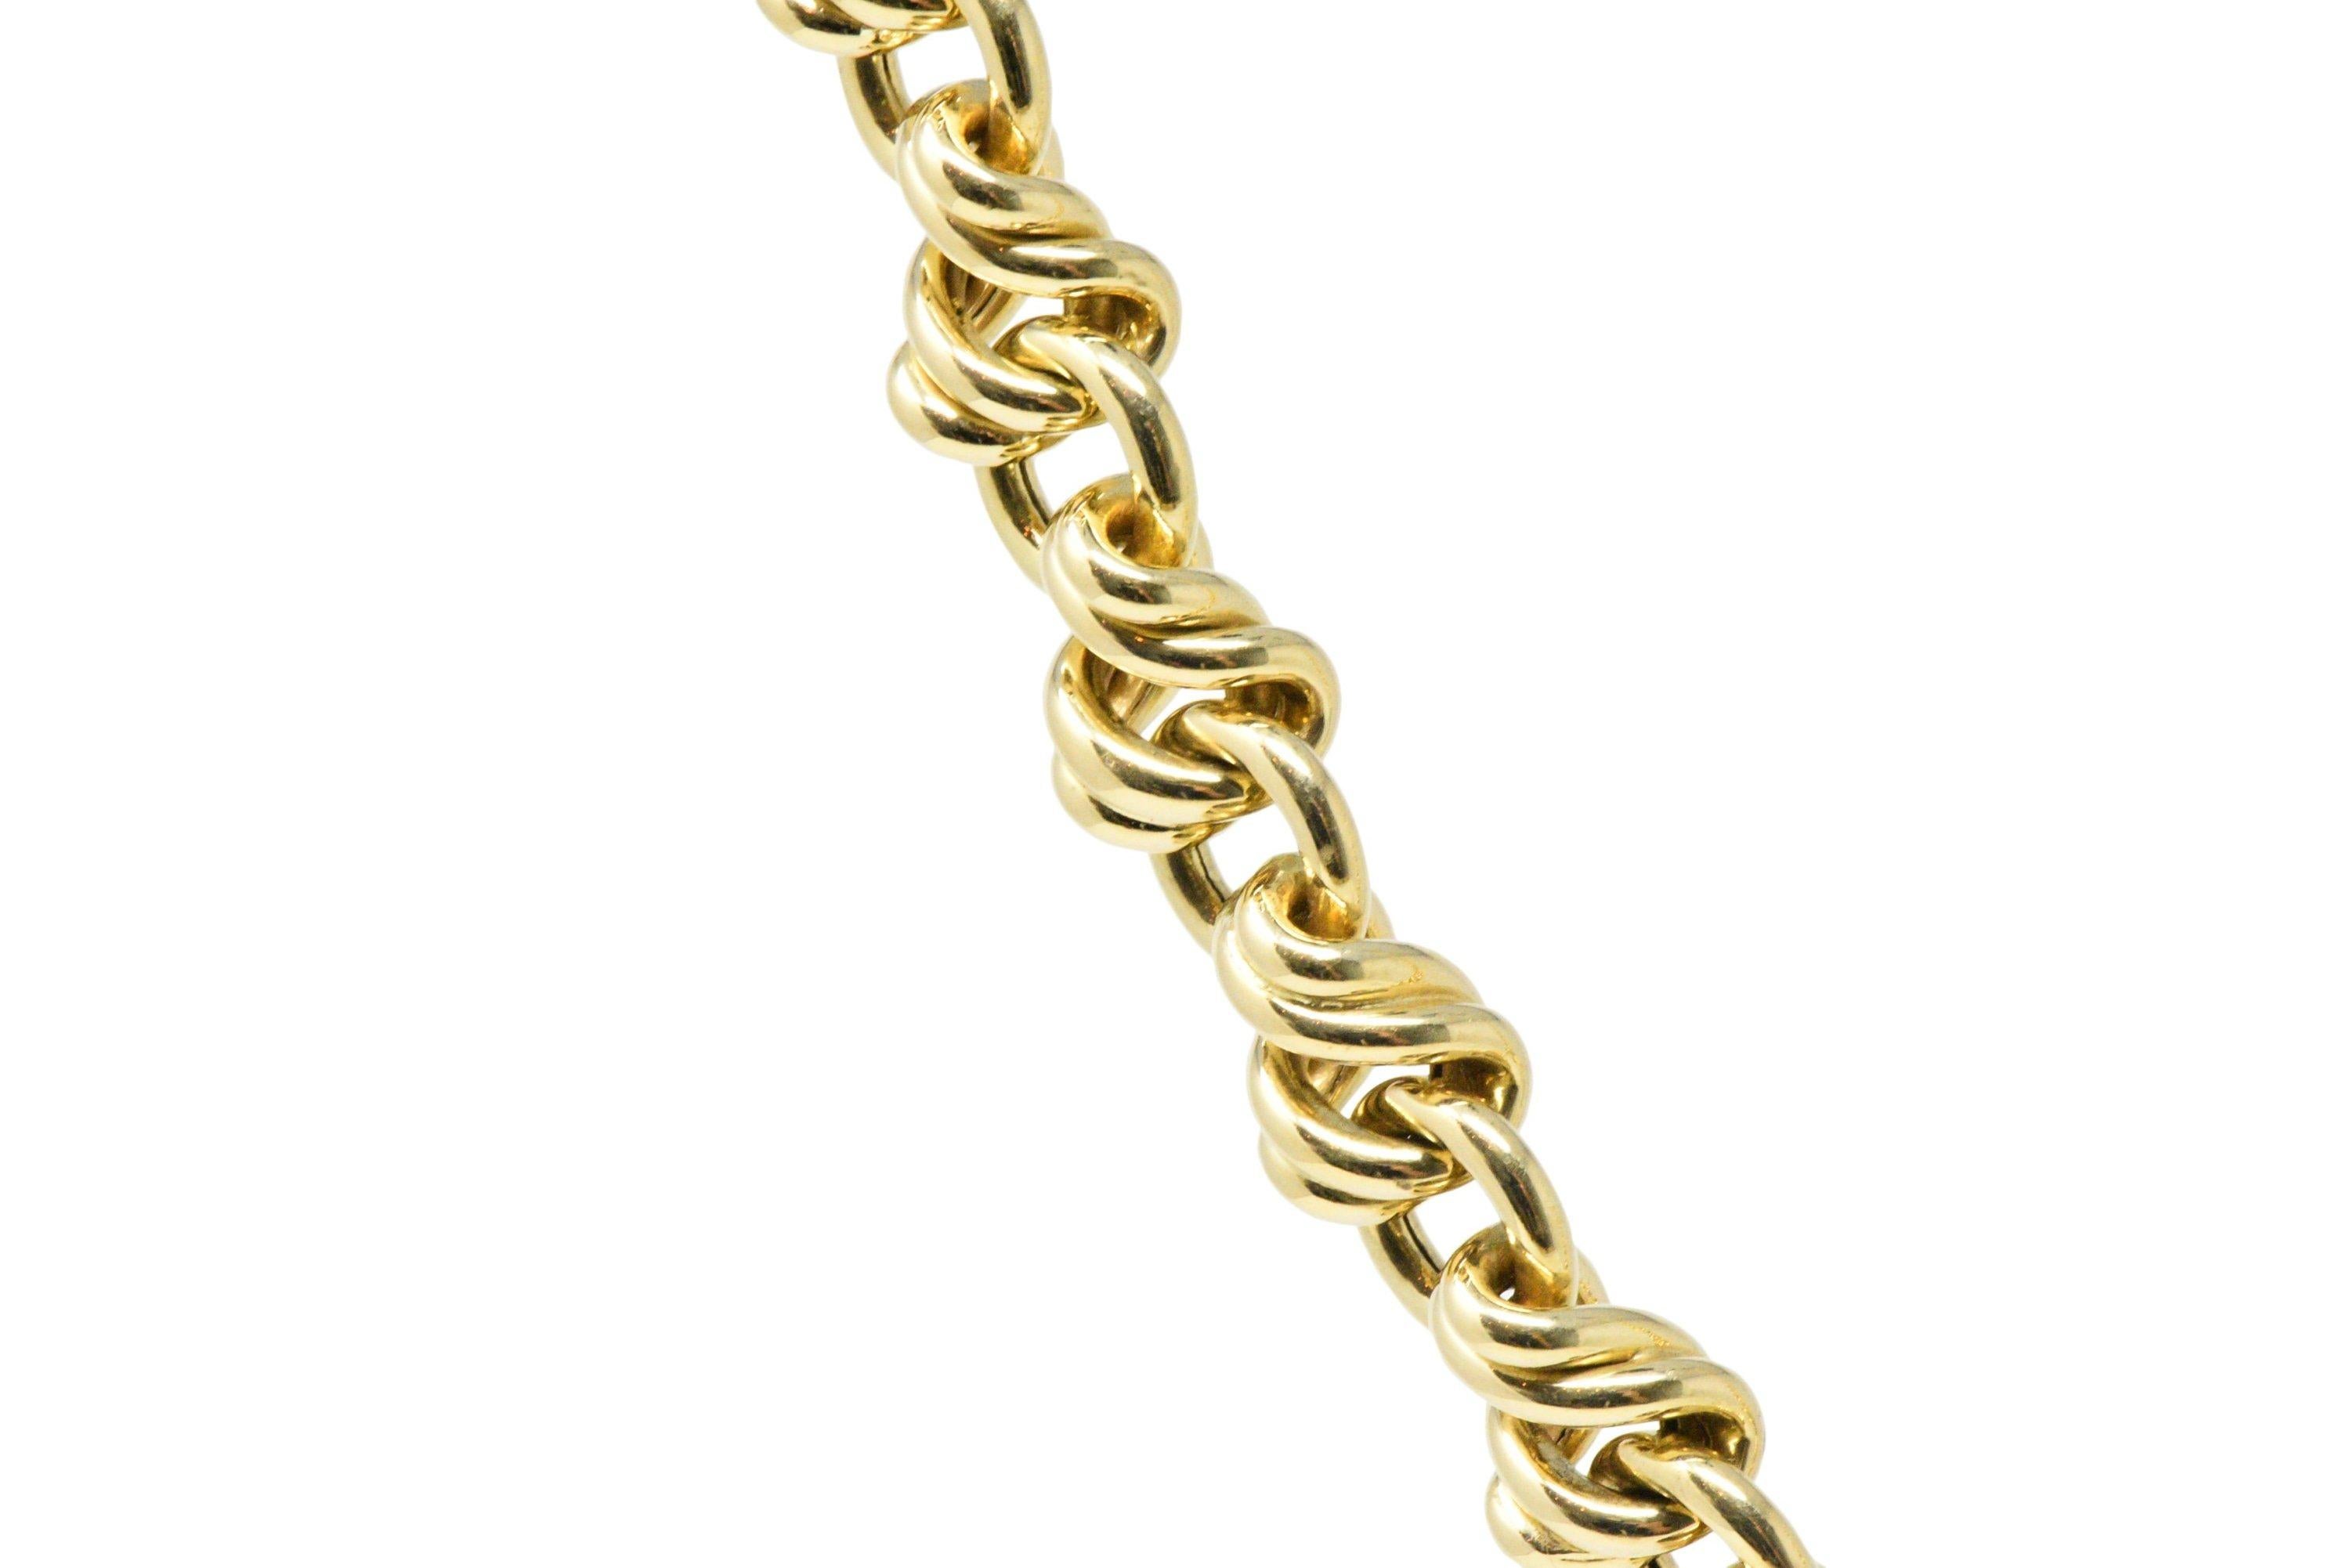 Chain style necklace comprised of round links alternating with a twisted curbed link 

With a bright polish

Completed by lobster clasp

Fully signed Tiffany & Co. 

Length: 17 inches

Total Weight: 60.3 Grams

Classy. Sophisticated. Effortless.
 

